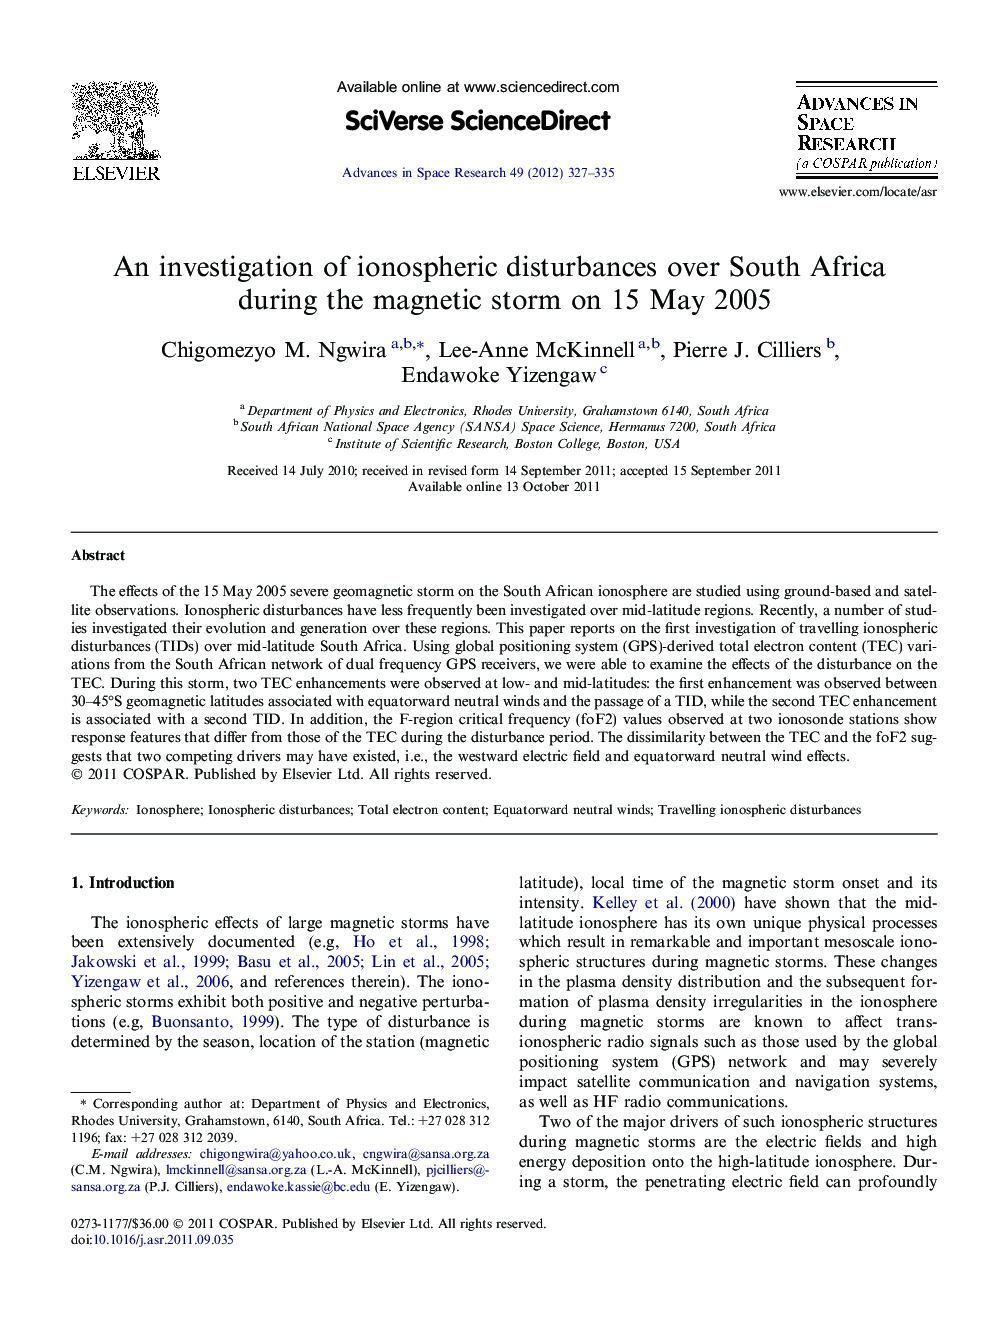 An investigation of ionospheric disturbances over South Africa during the magnetic storm on 15 May 2005